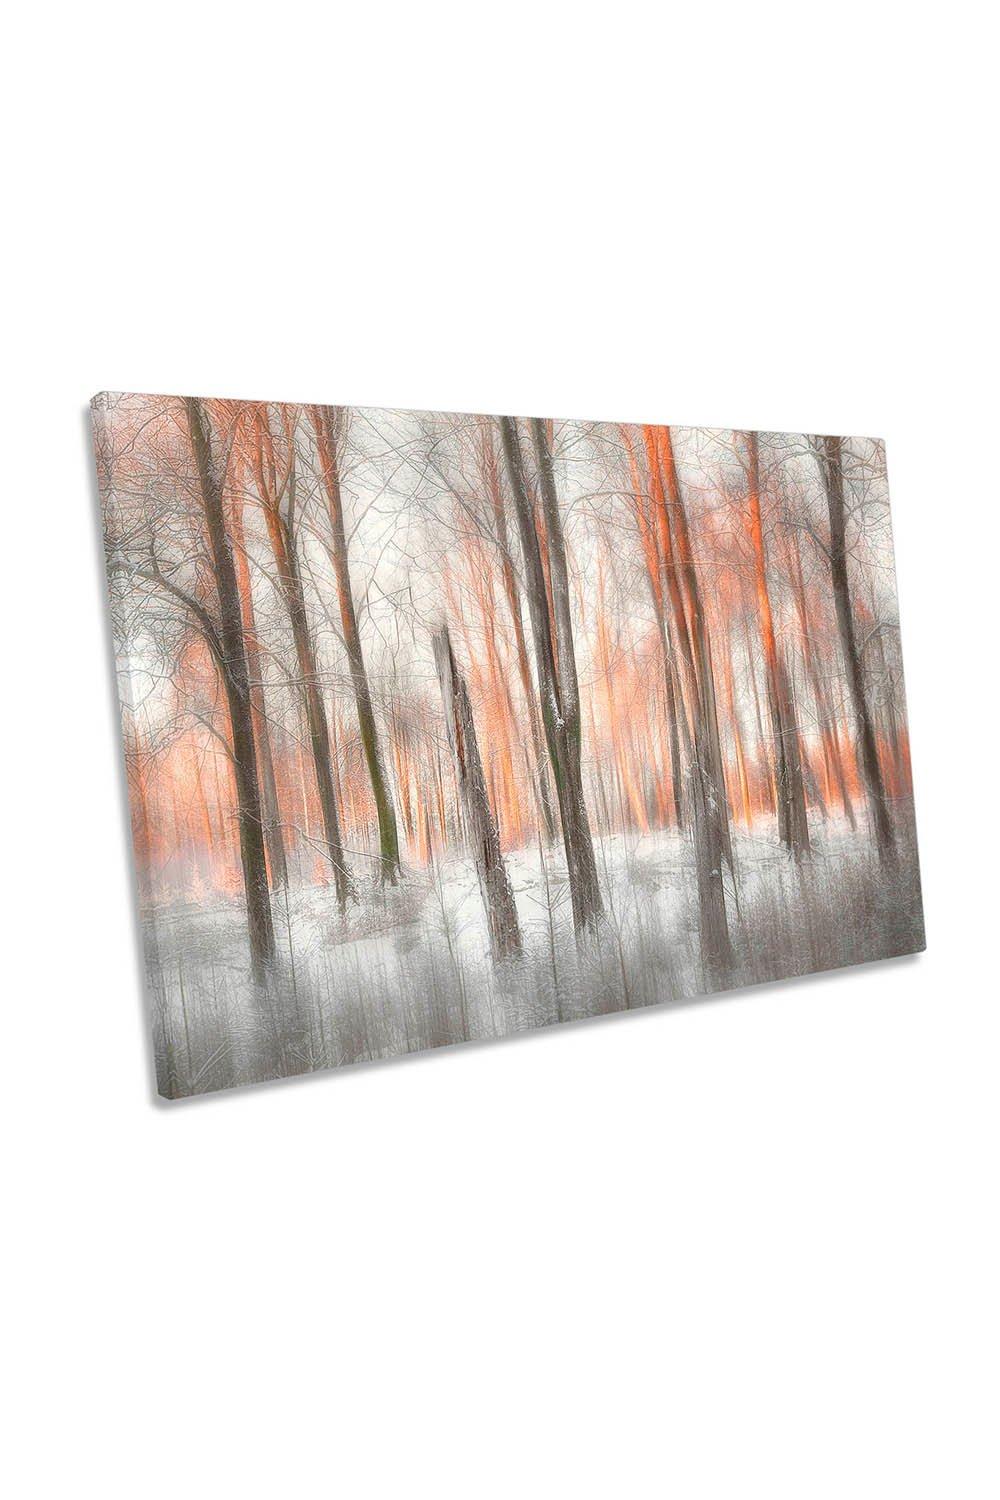 Evening Light Forest Abstract Canvas Wall Art Picture Print